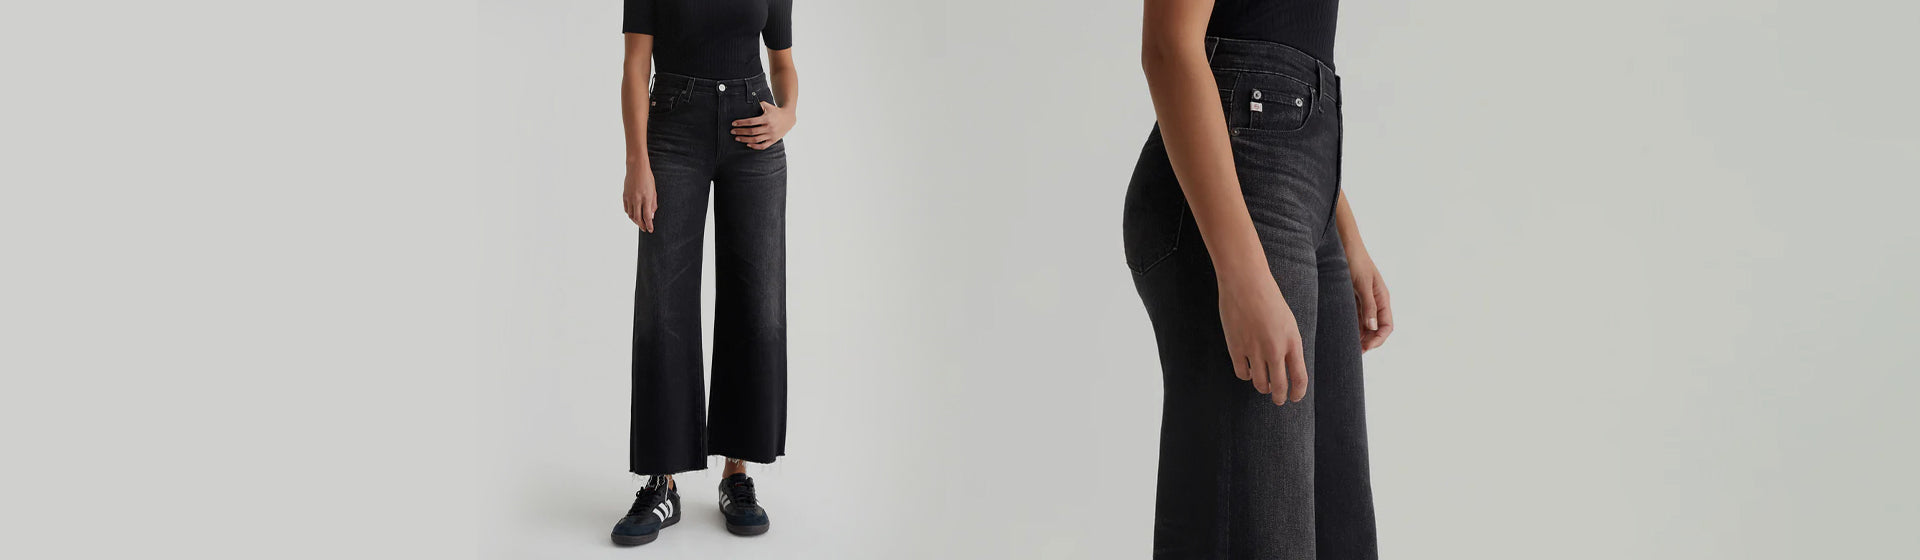 Women's High-Rise Jeans and Pants